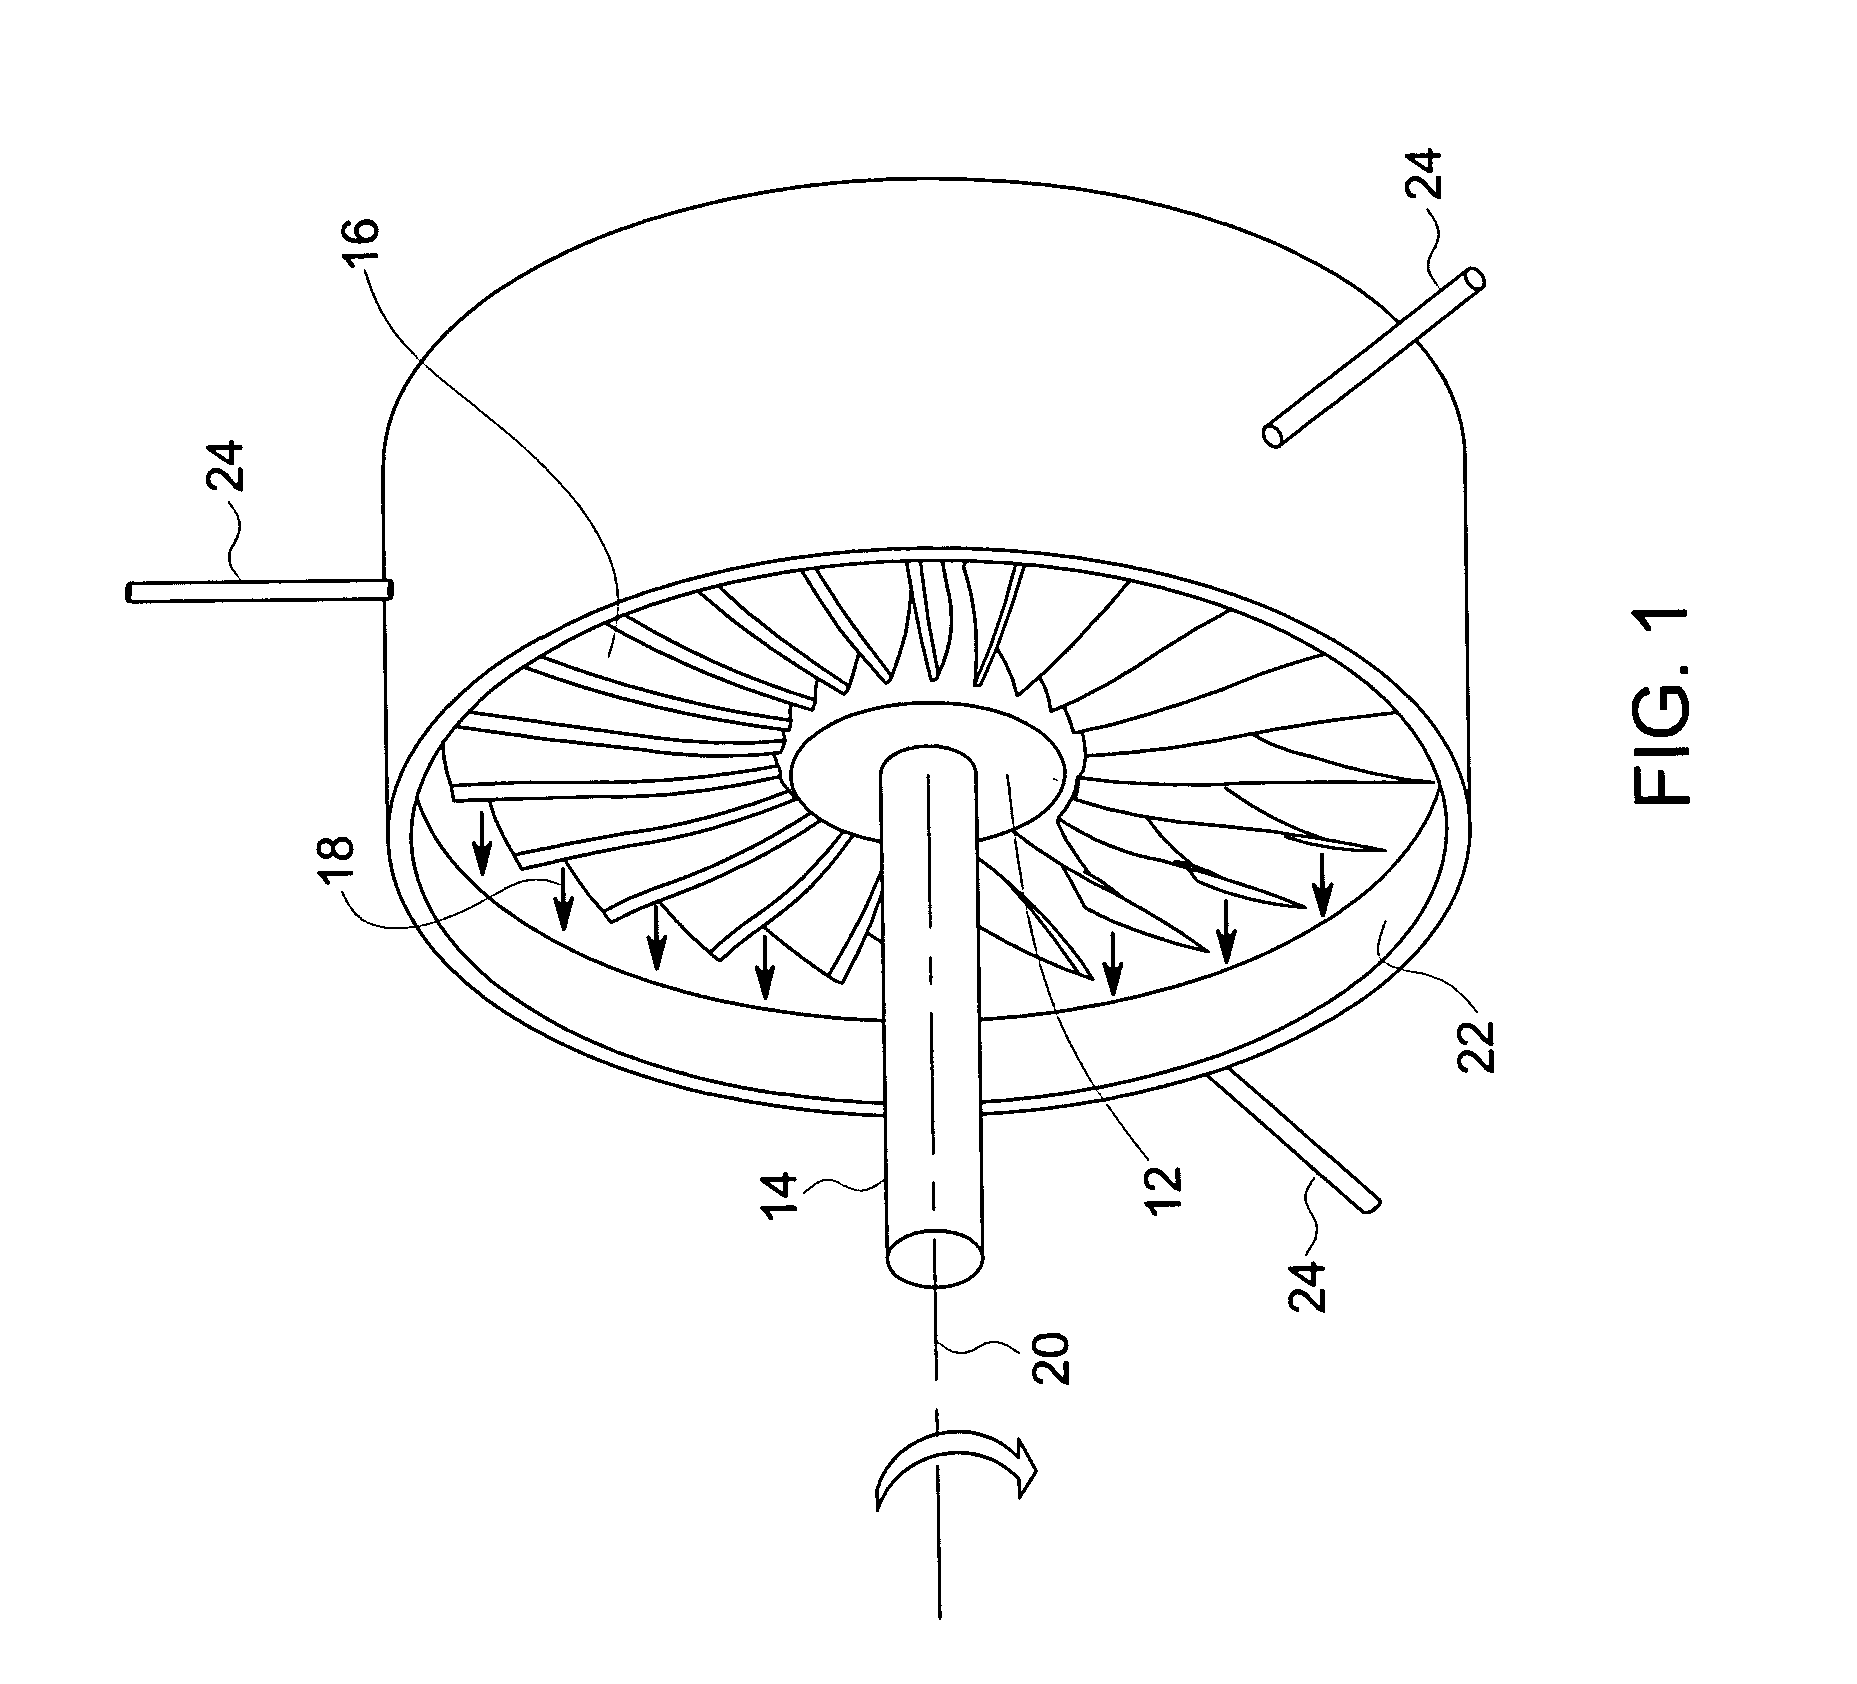 Displacement sensor system and method of operation